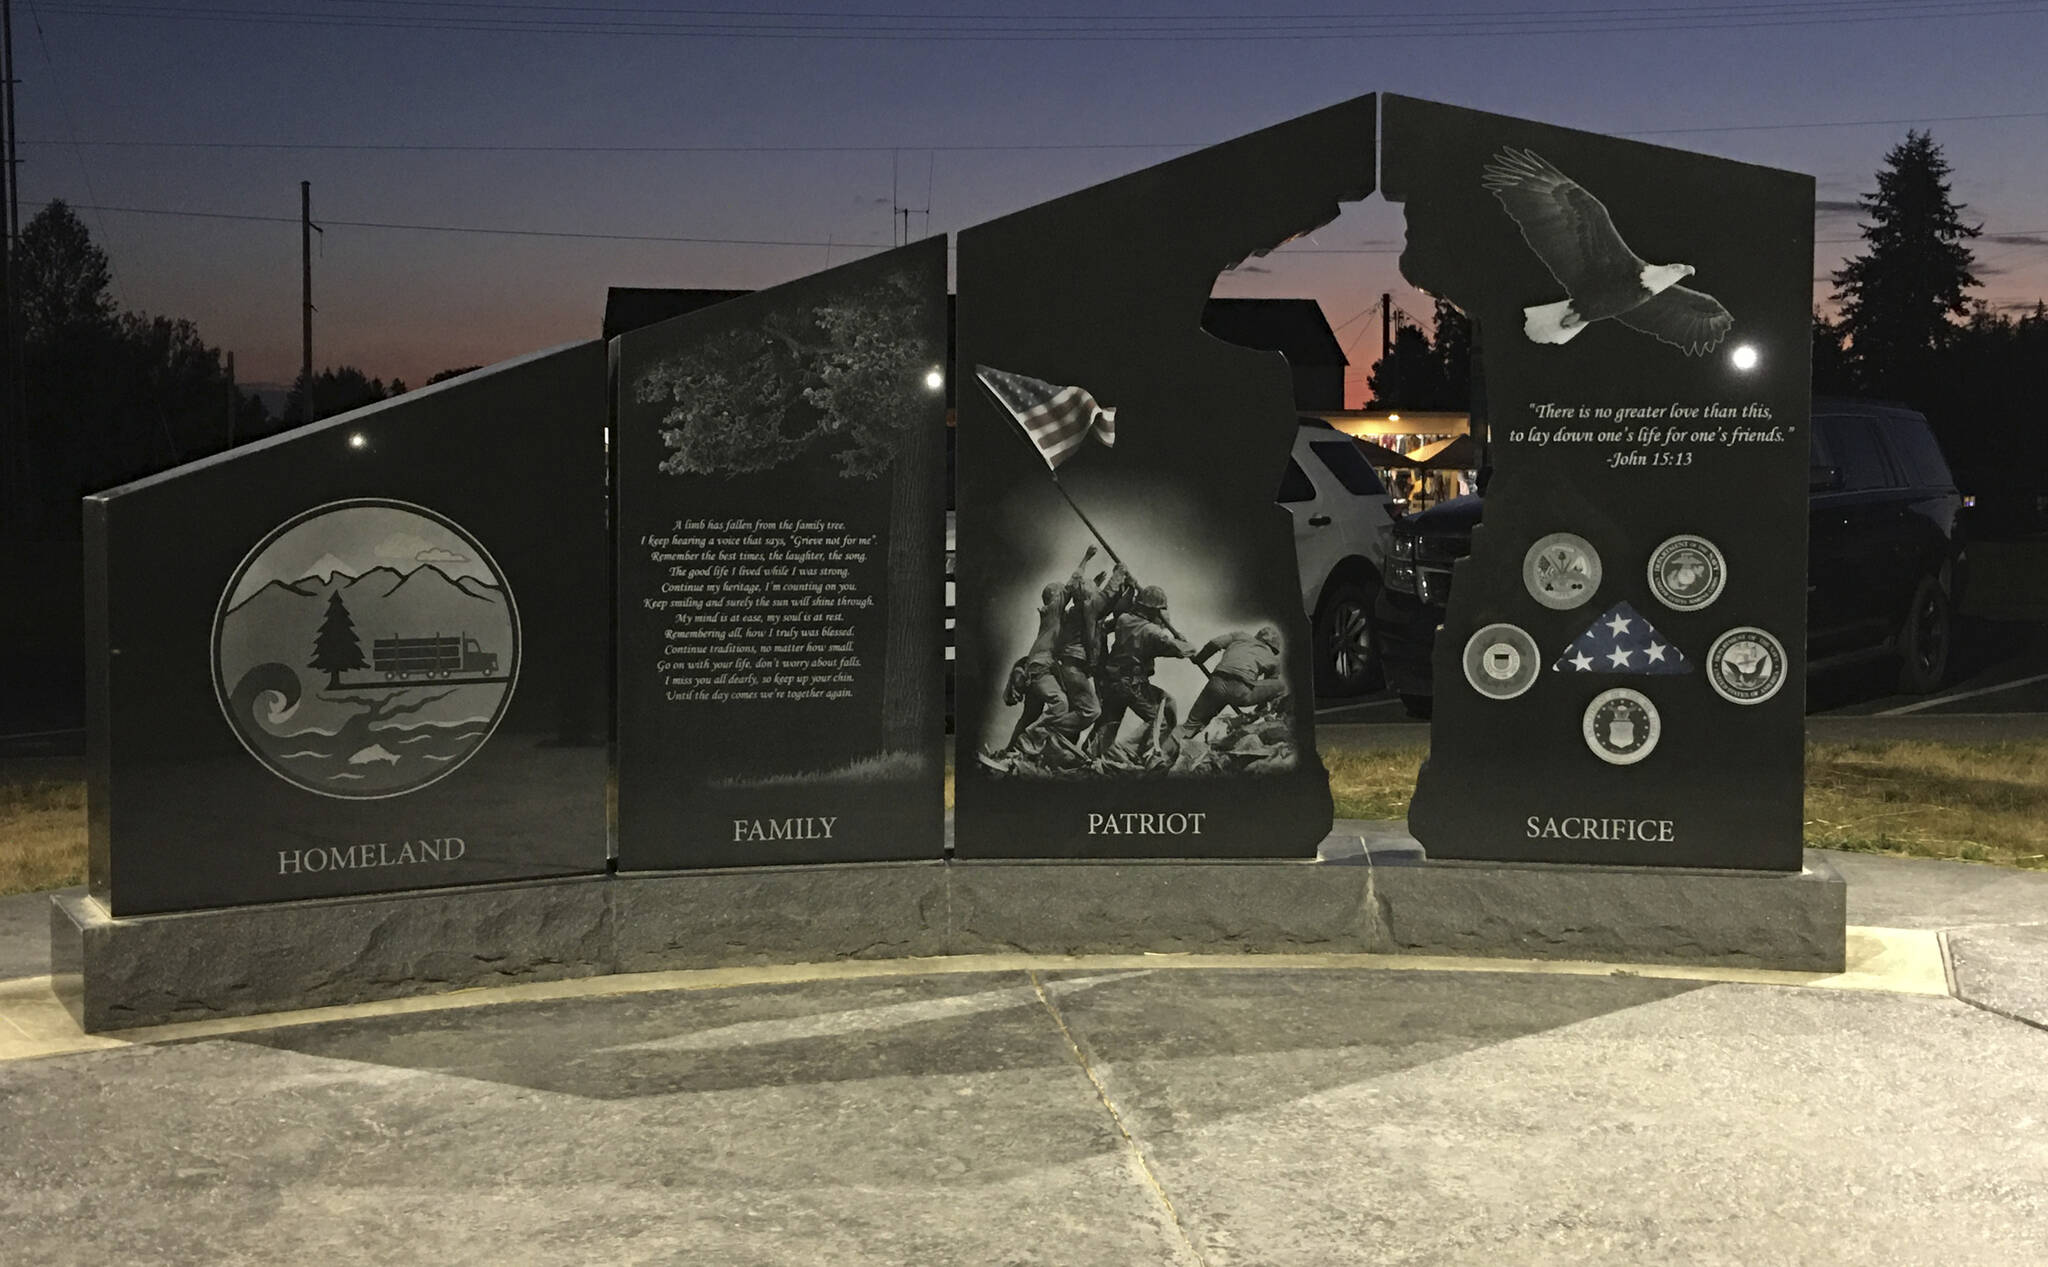 When the Gold Star Families Memorial Monument was completed money remained in the budget to add lighting, then COVID happened and the lighting project was delayed. With the closing of the VFW the funds were transferred to the American Legion and they assisted with ordering the lights and completing that part of the project. The backside of the monument shows that the monument can now be seen even after dark. Submitted photo